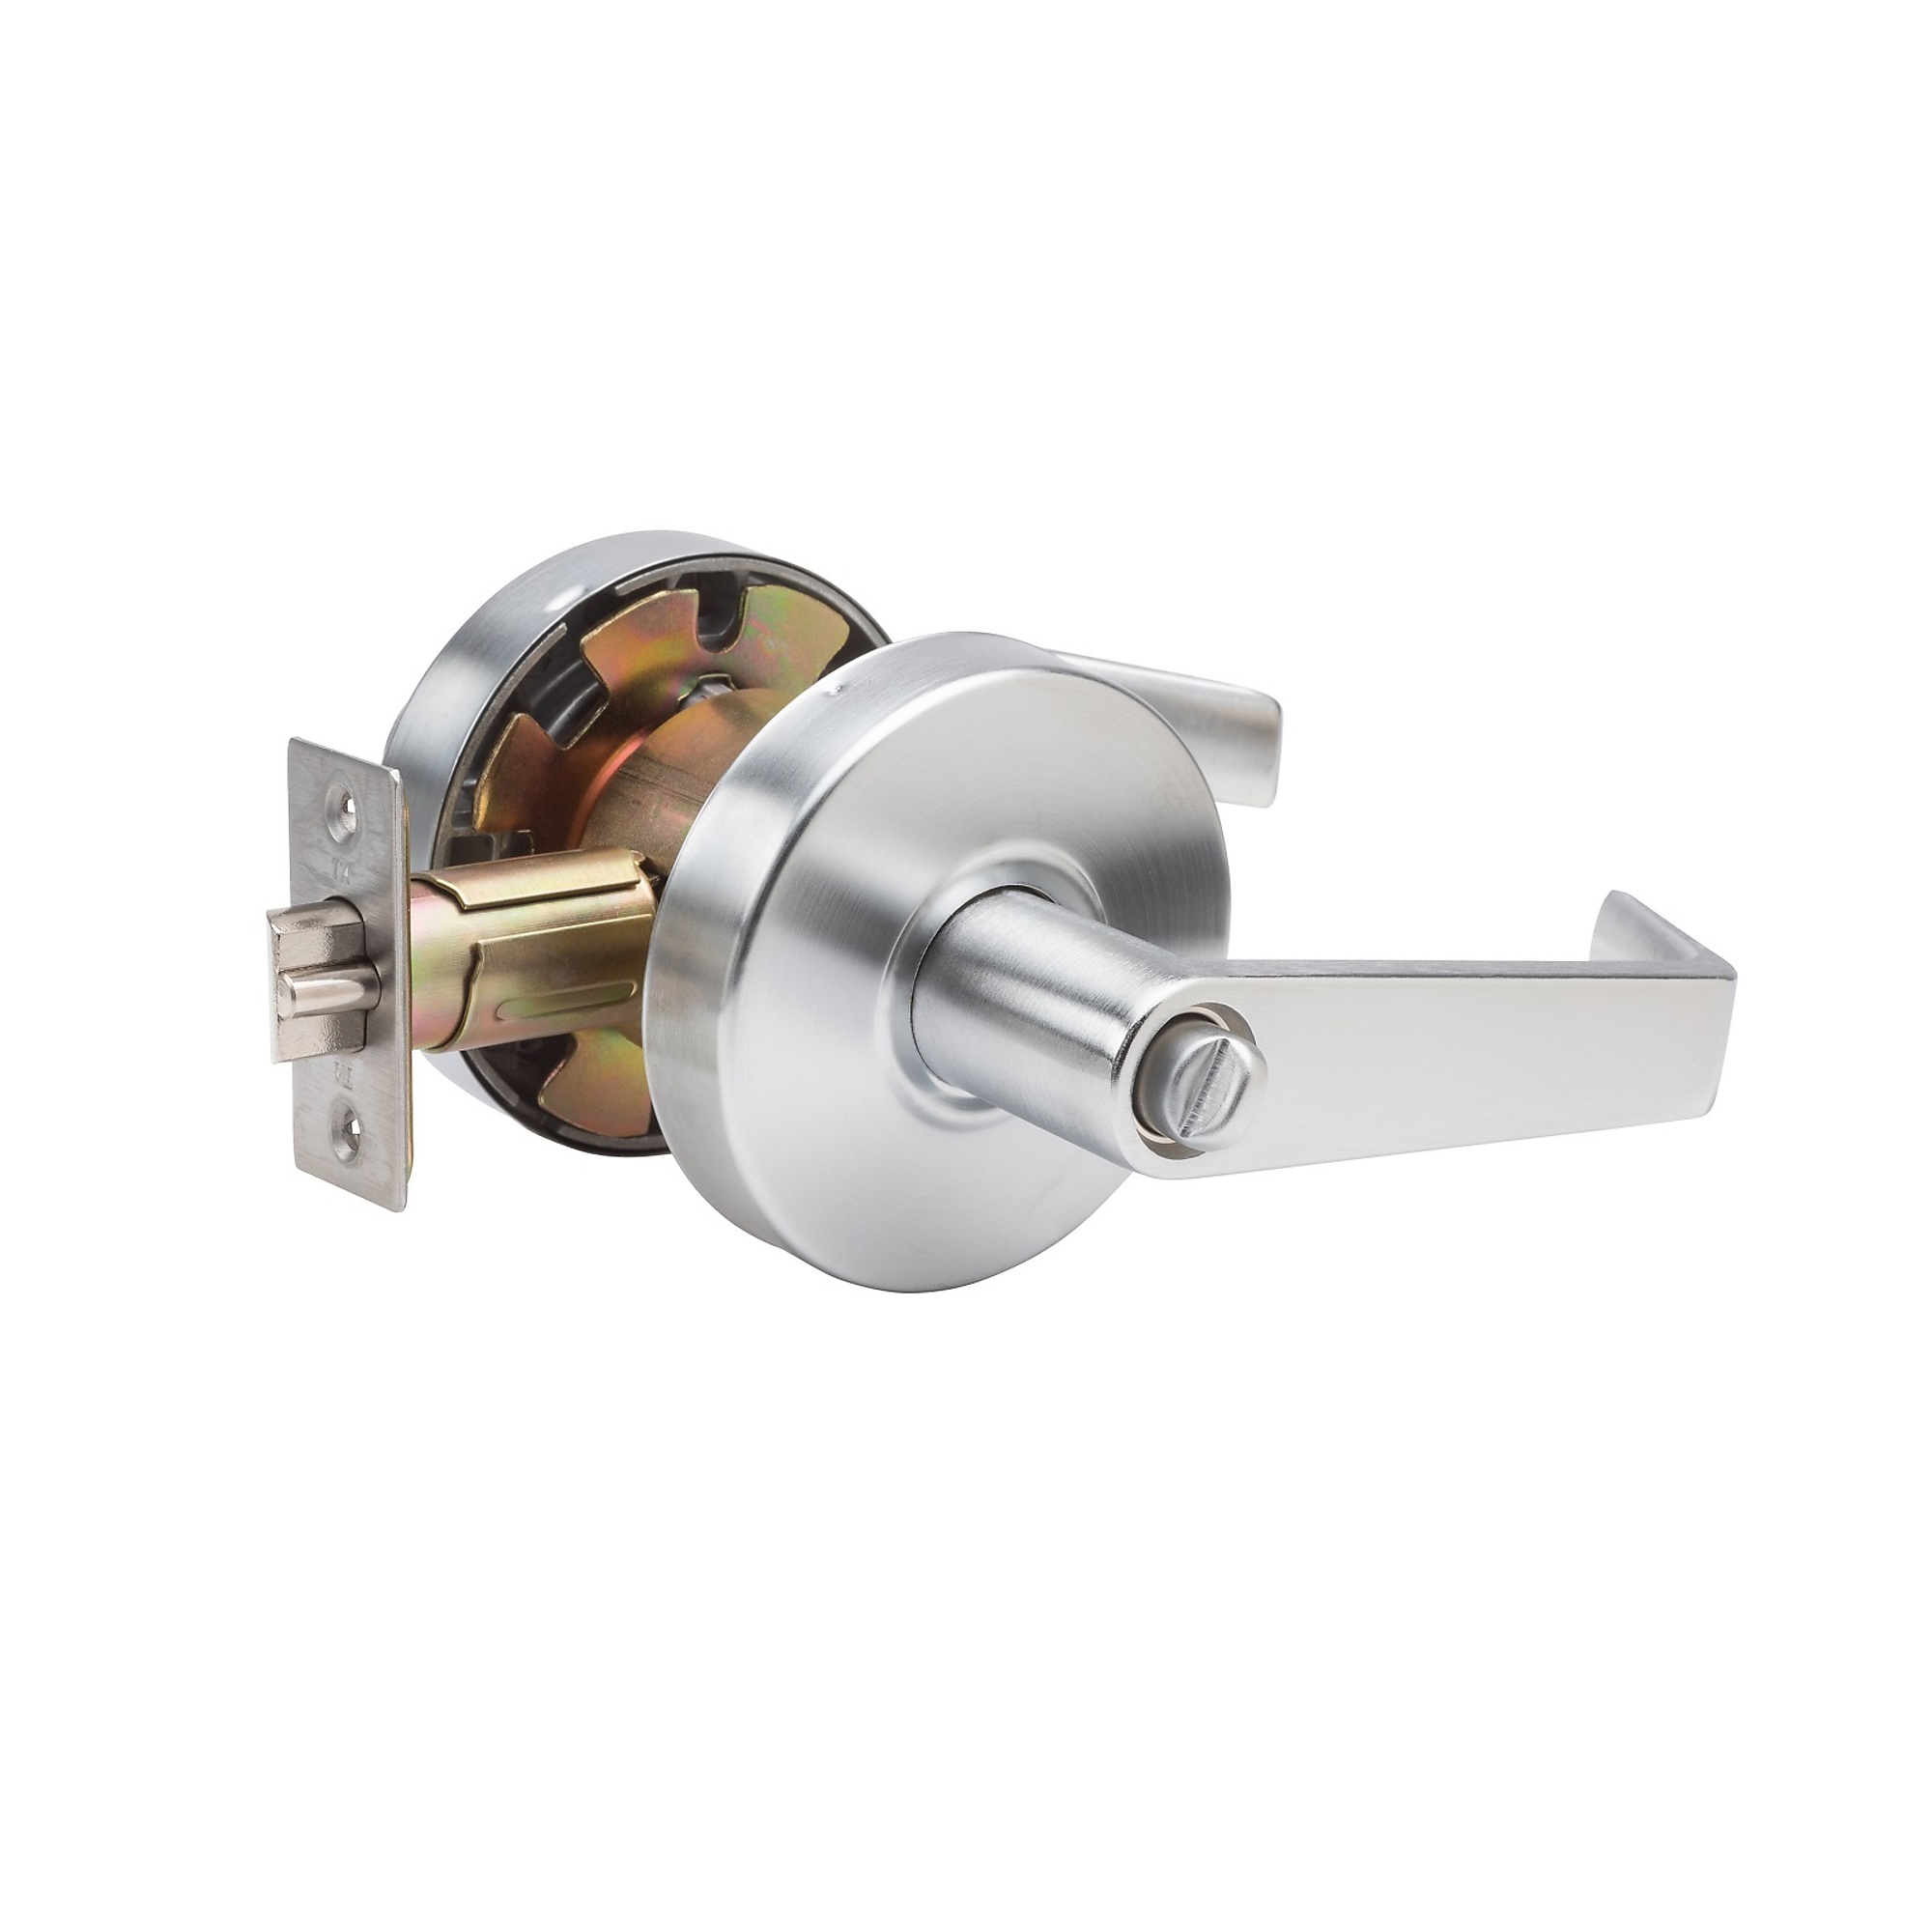 Trans Atlantic, Saturn Series Commercial Cylindrical Door Handle with Lock, Model DL-LSV40-US26D